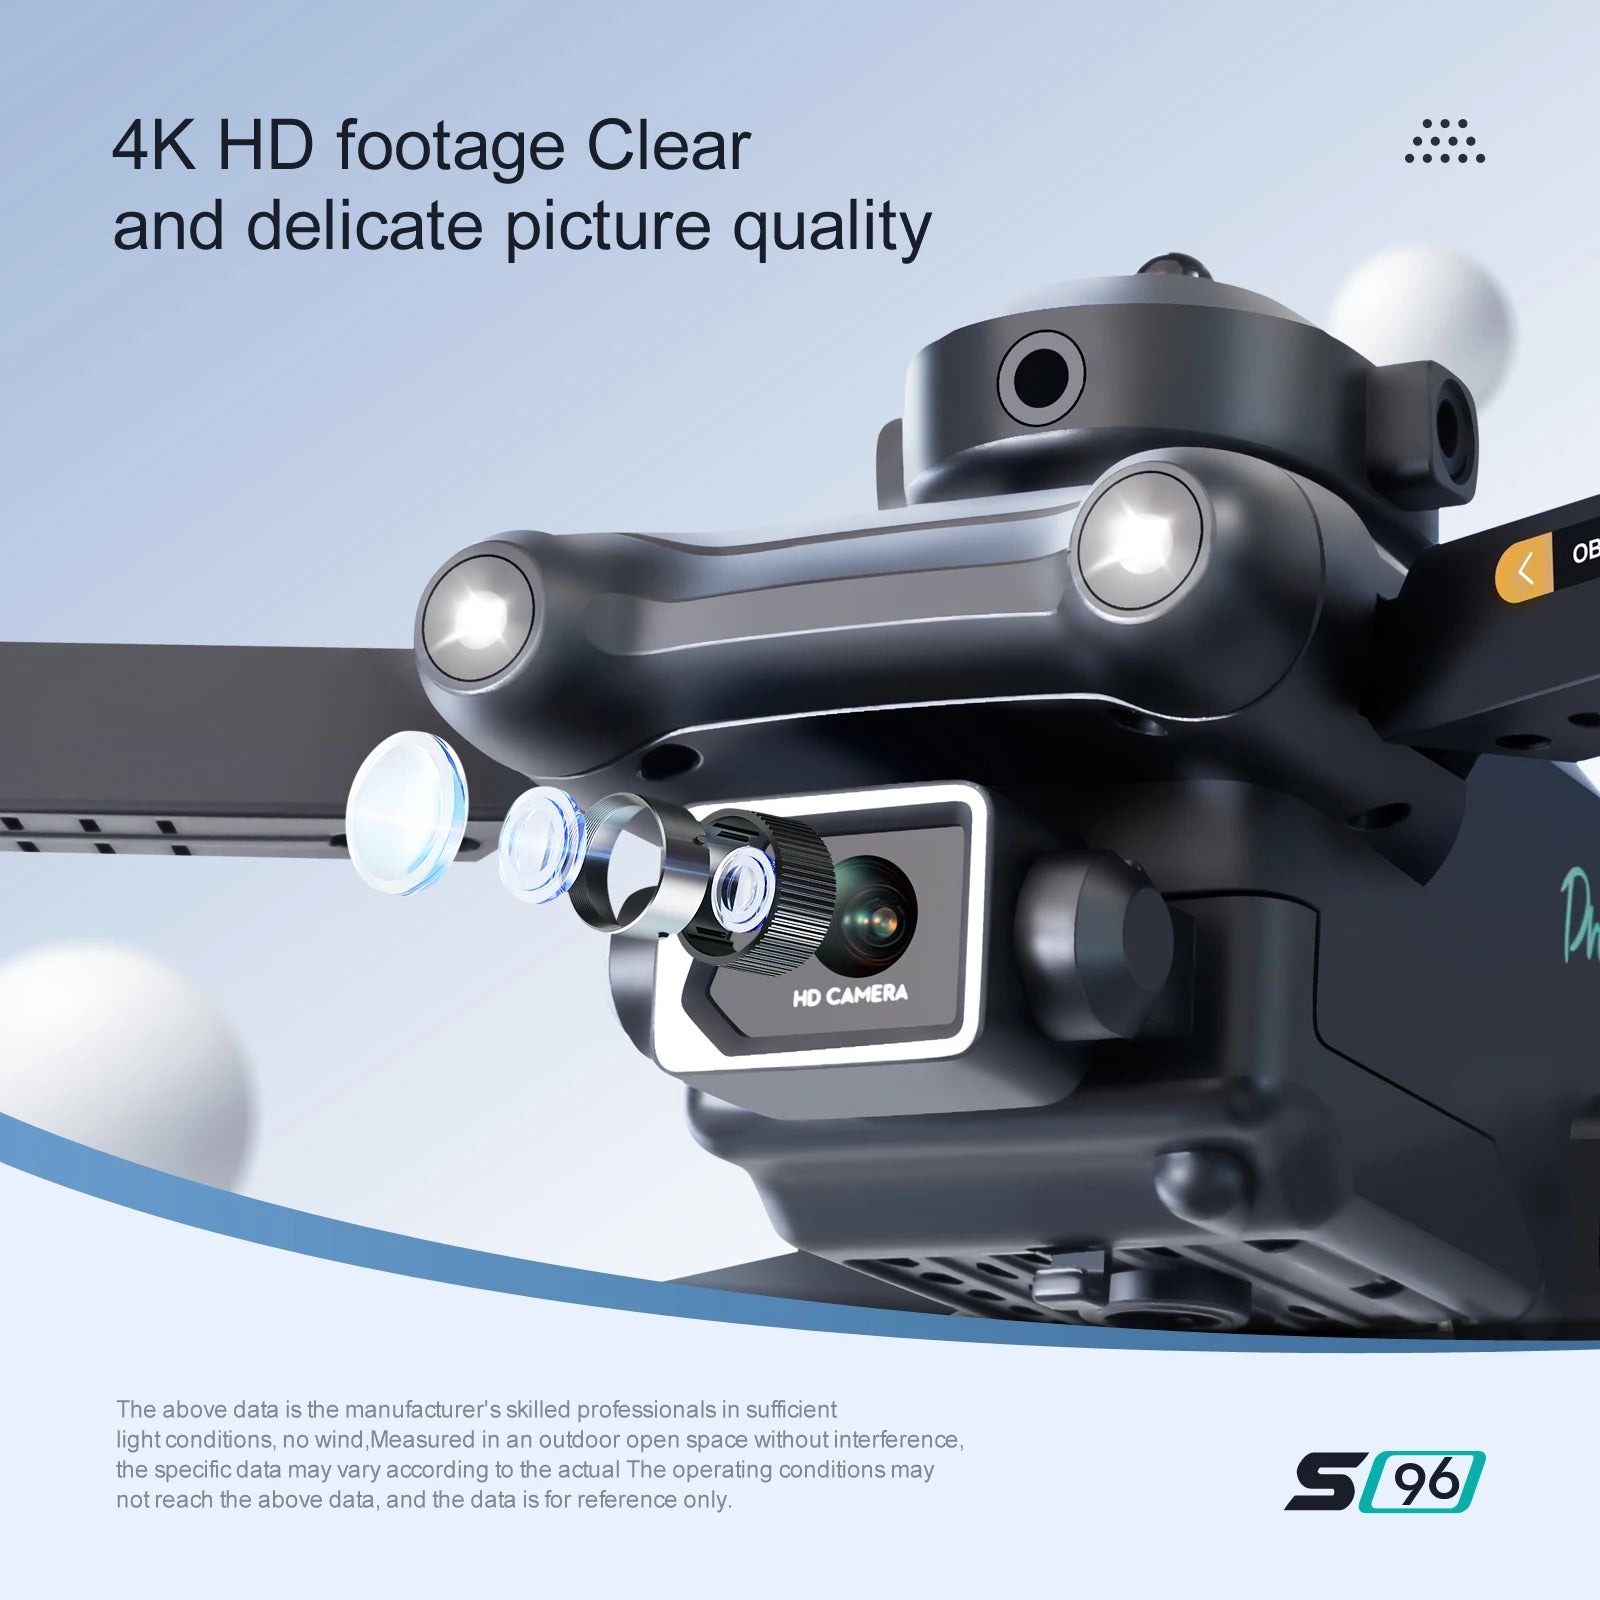 S96 Mini Drone, 4k hd footage clear and delicate picture quality ob